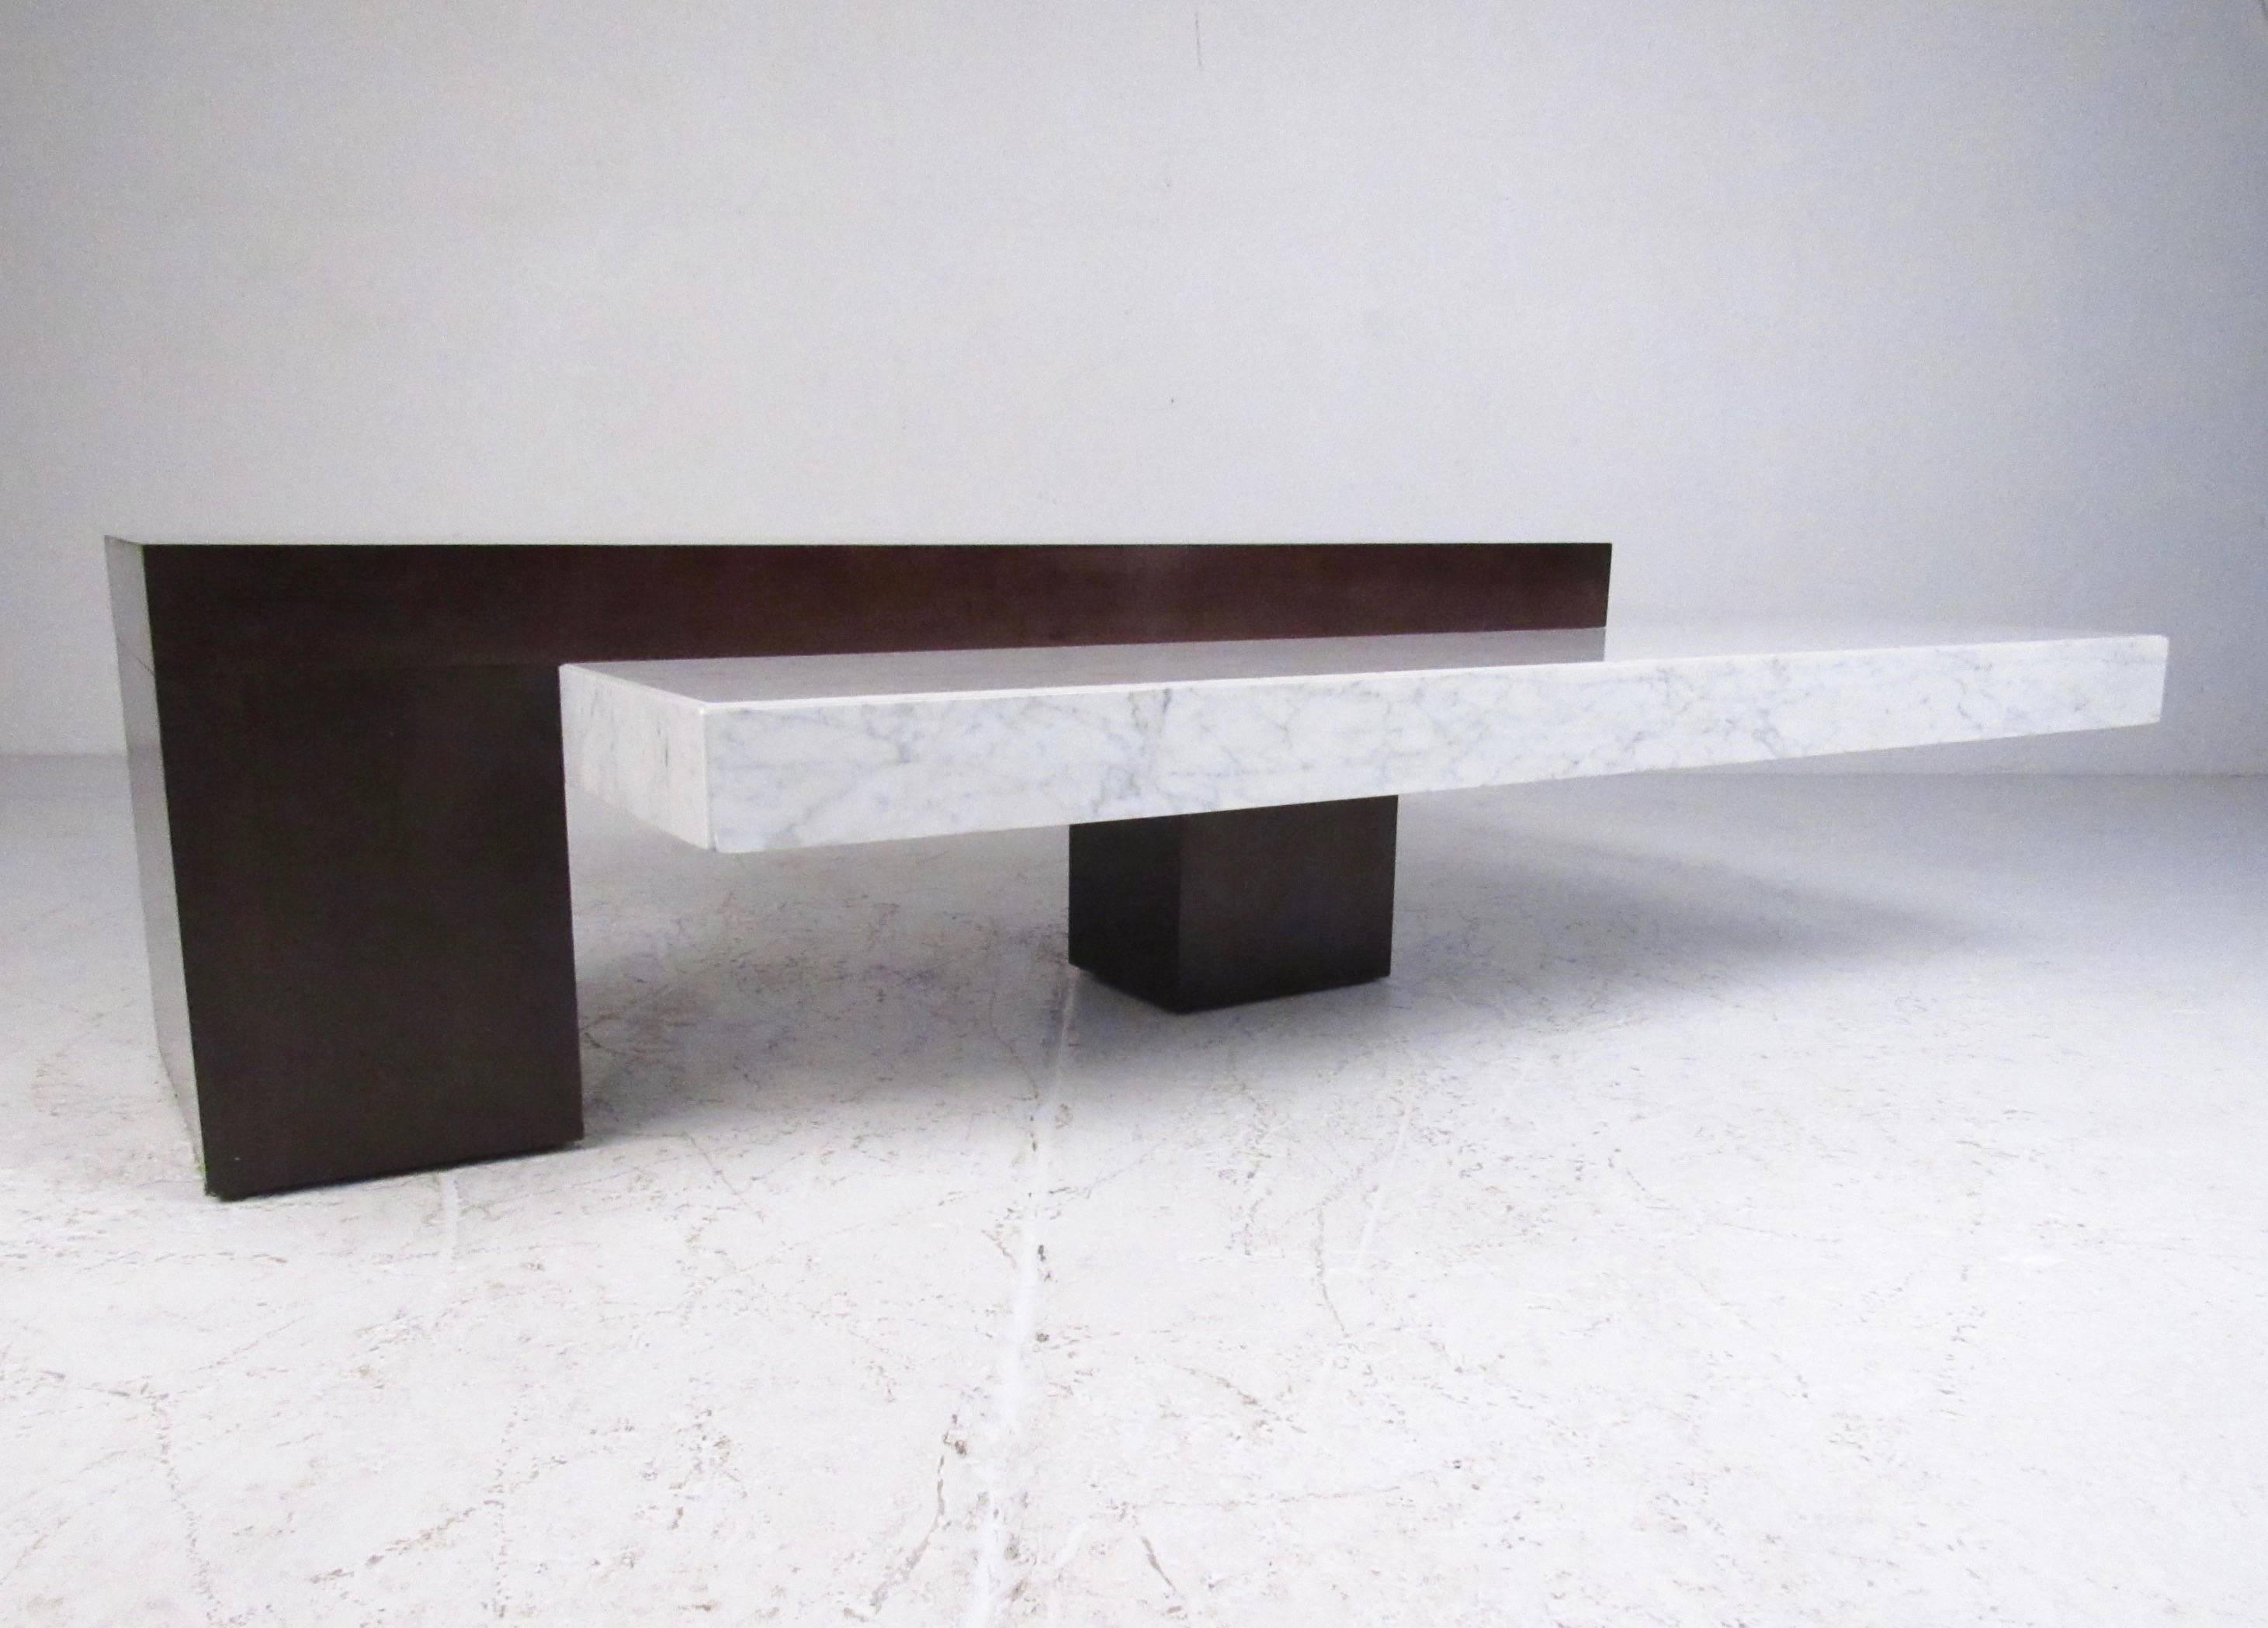 This gorgeous Italian marble coffee table features cantilever like design with a rich mahogany finish base with heavy marble top. Impressive cocktail table for any seating area makes a stylish modern addition to home or office. Please confirm item